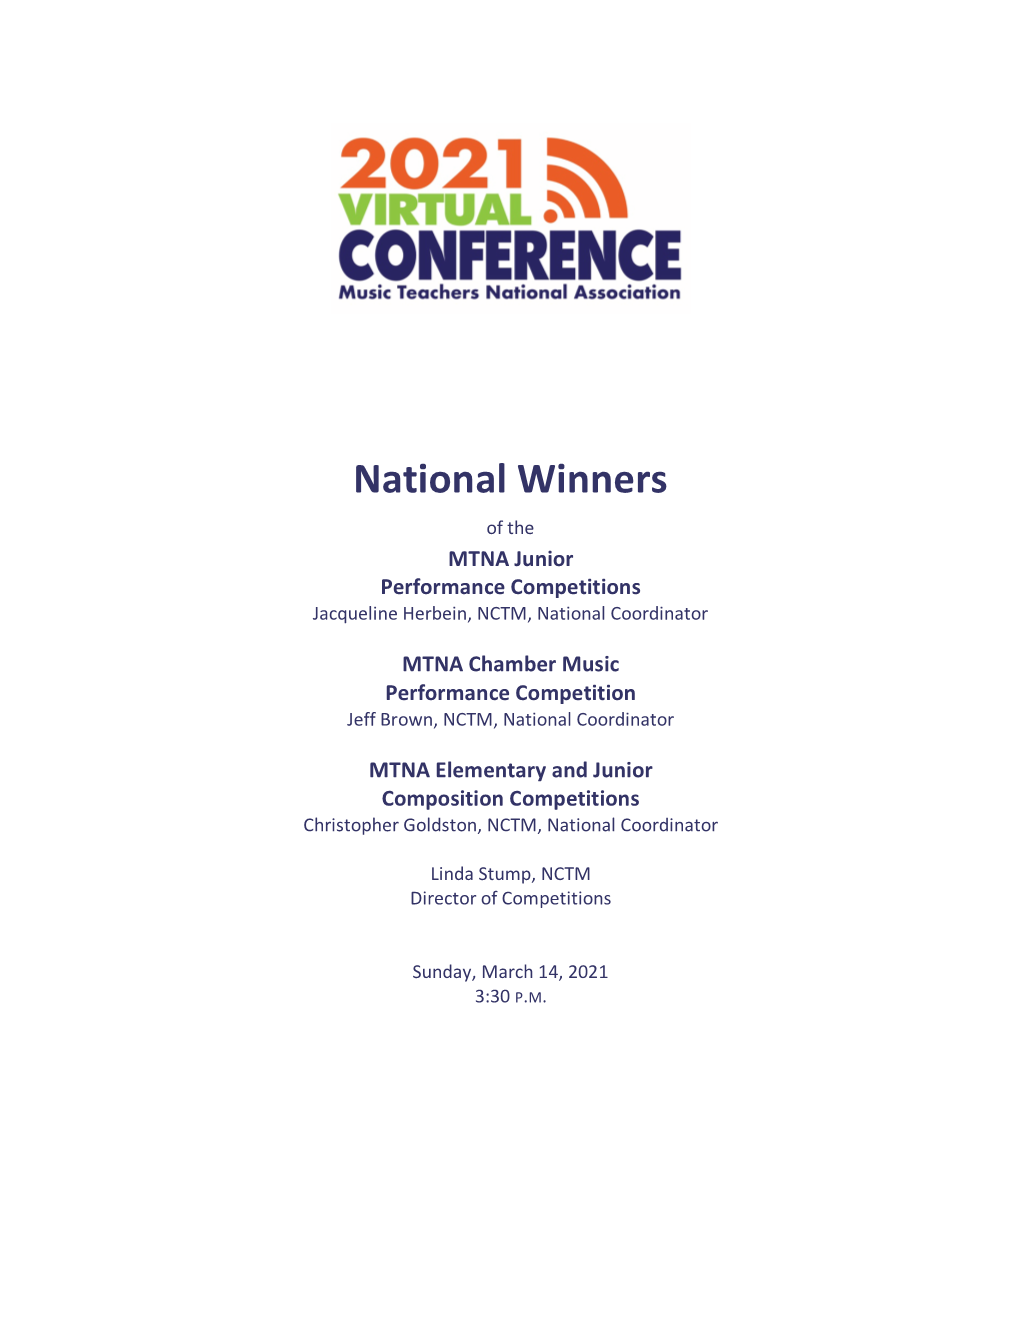 National Winners of the MTNA Junior Performance Competitions Jacqueline Herbein, NCTM, National Coordinator